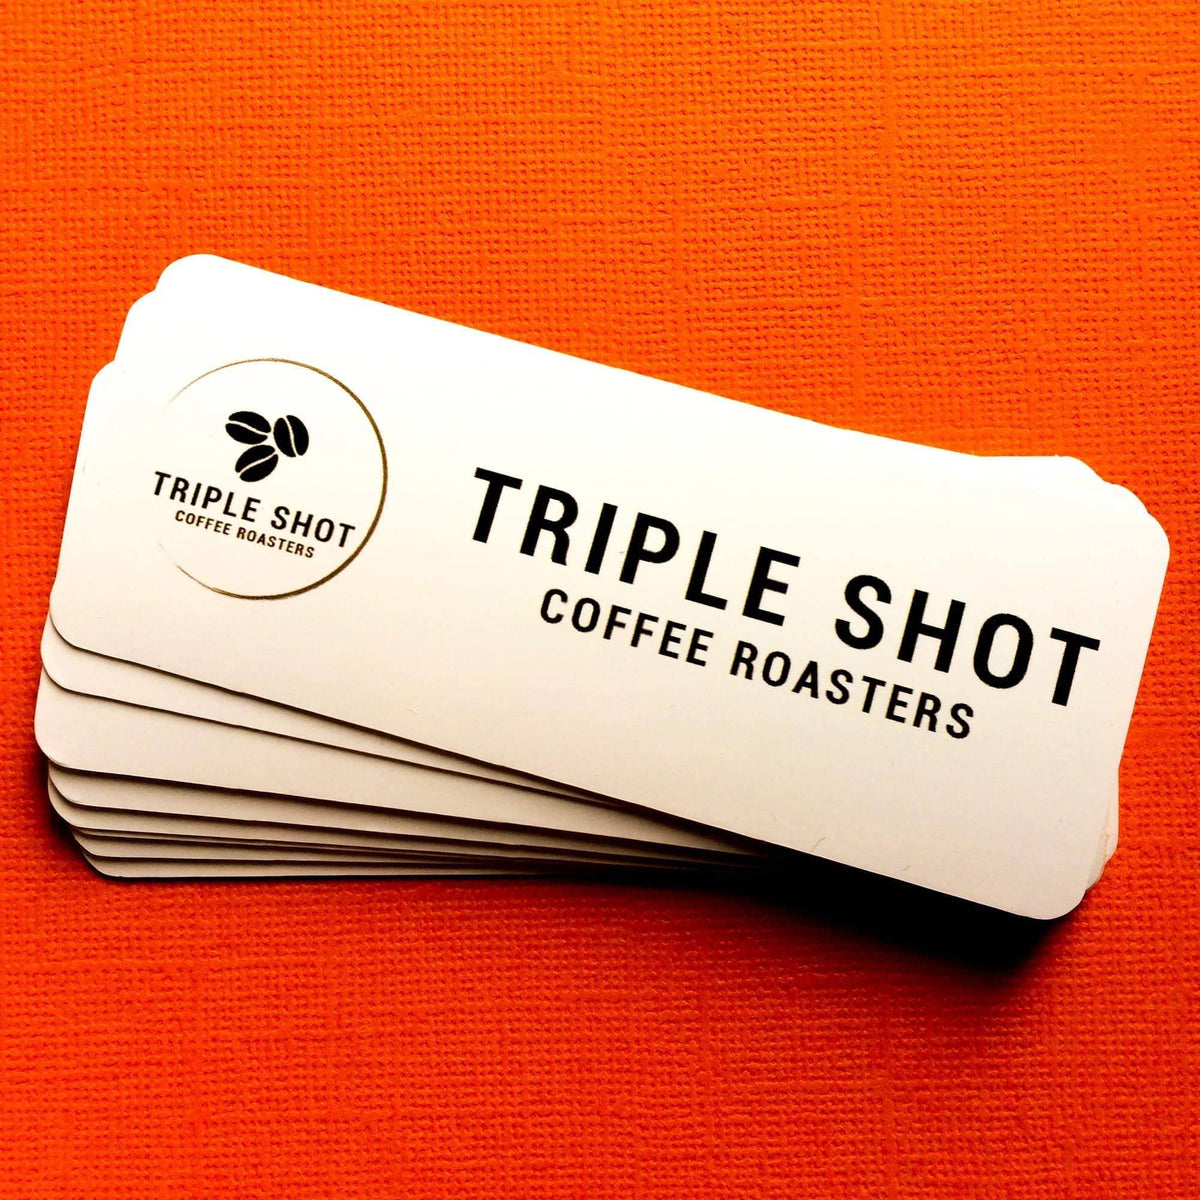 Stickers to promote startups and local businesses in Australia